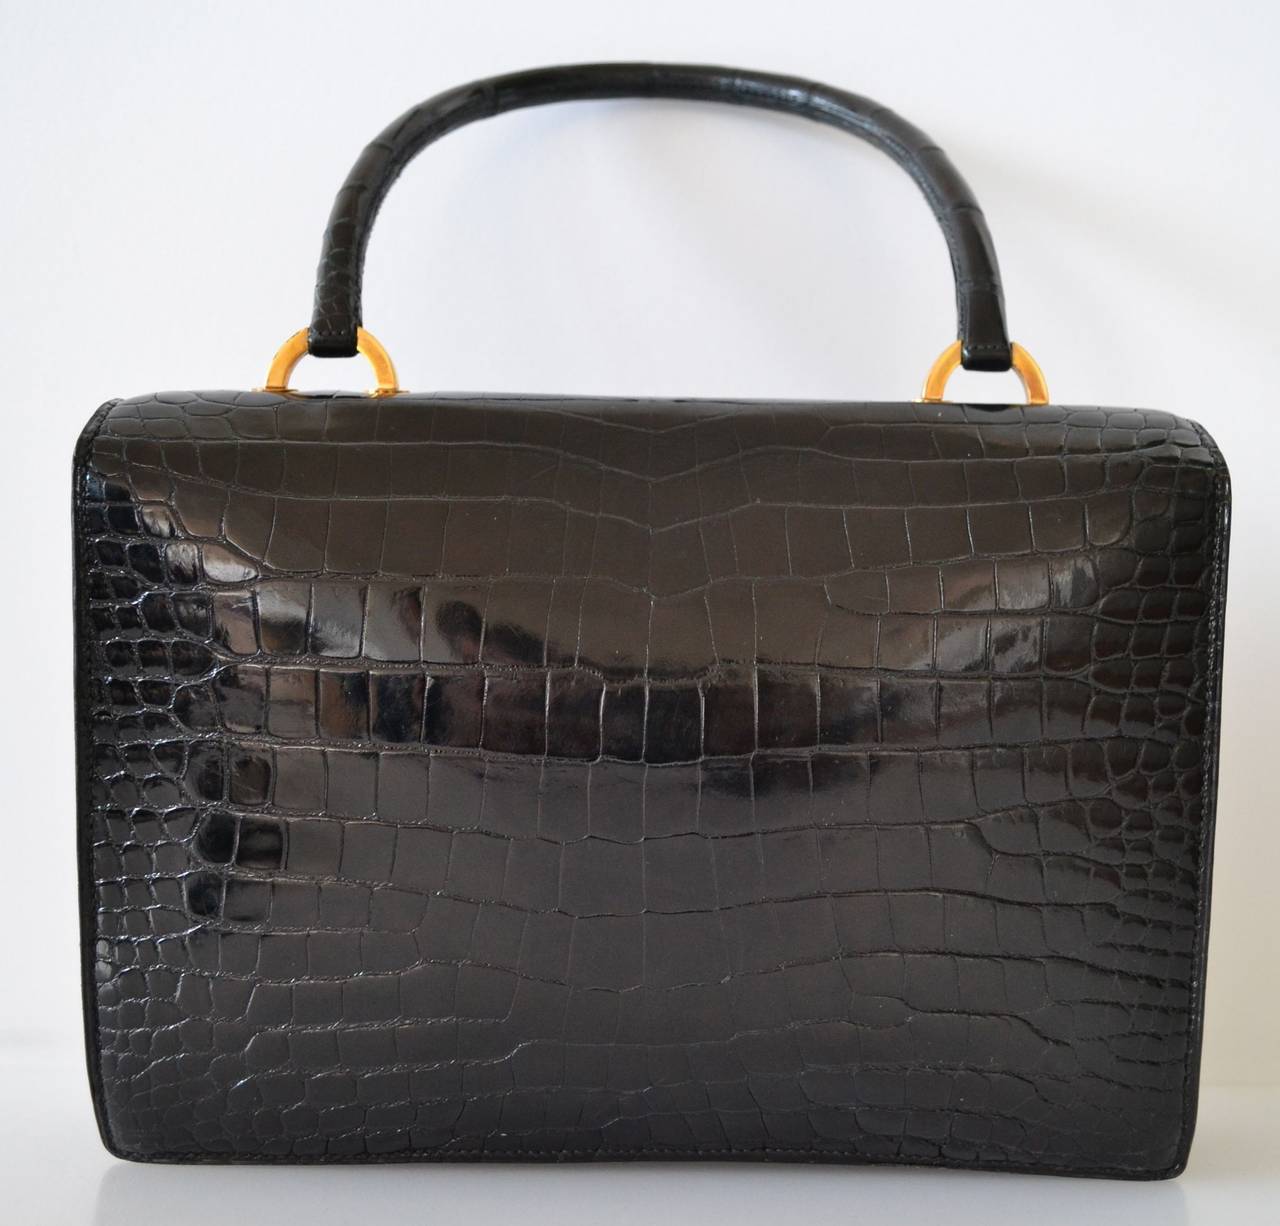 Hermes Piano crocodile Porosus
 
Crocodile skin in black color in gold hardware
Vintage model in very good condition
 
Handle and corners are in very good condition
Odorless
Hermes Paris marking
 
Dimensions : 25 x 20 x 7 cms – 10 x 8 x 3